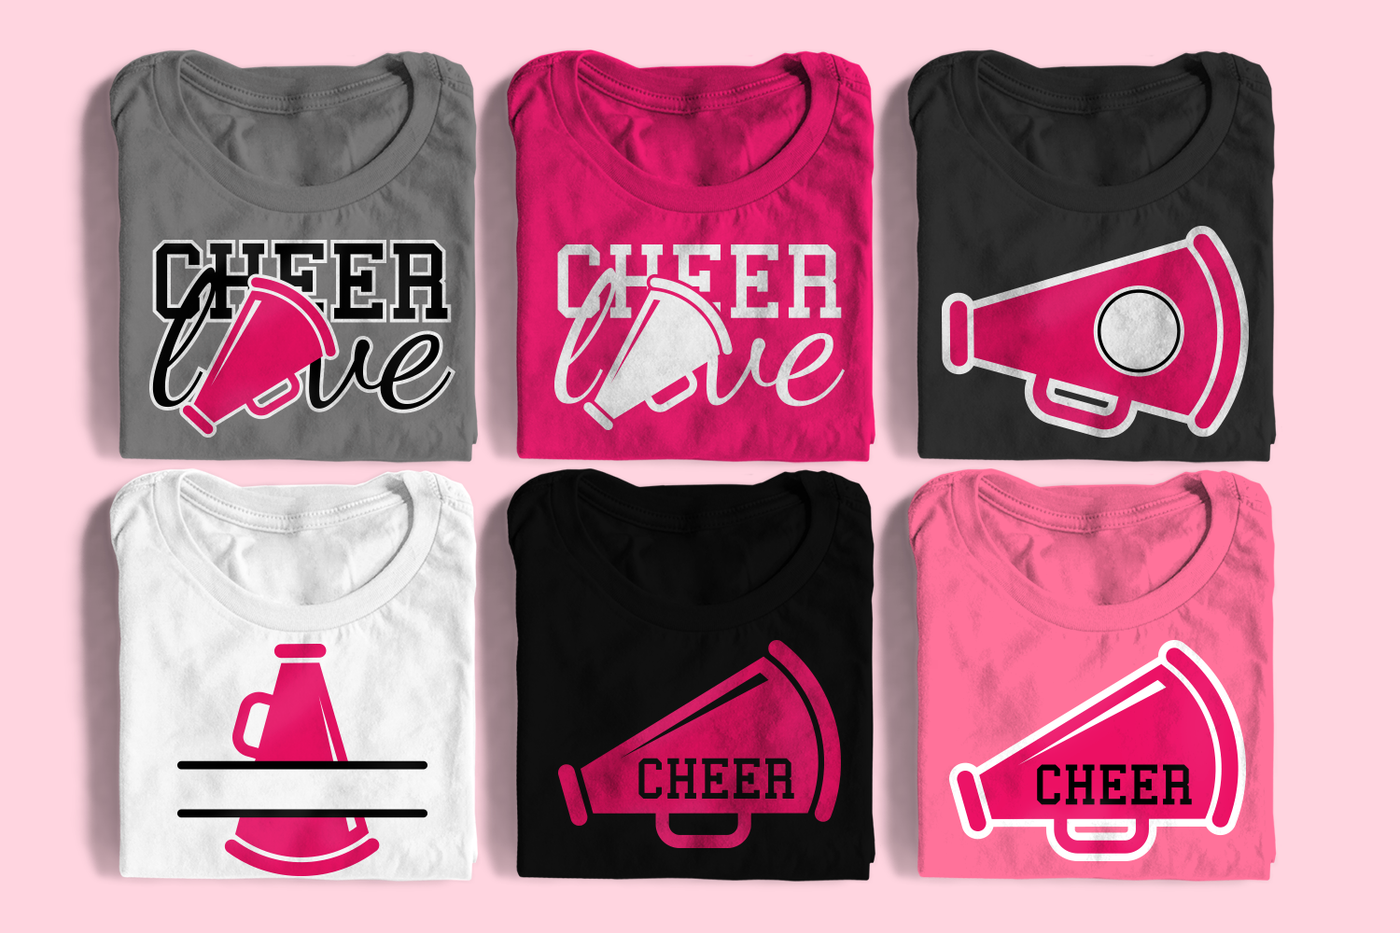 Six folded shirts, each with a different Cheerleading themed design: Megaphone with the word CHEER as a single color, Megaphone with the word CHEER as a multi-color design with a background outline, Megaphone split,  Megaphone with a circle cut out of the middle, , The phrase "CHEER love" with a megaphone in place of the O as a single color, The phrase "CHEER love" with a megaphone in place of the O as a multi-color design with a background outline